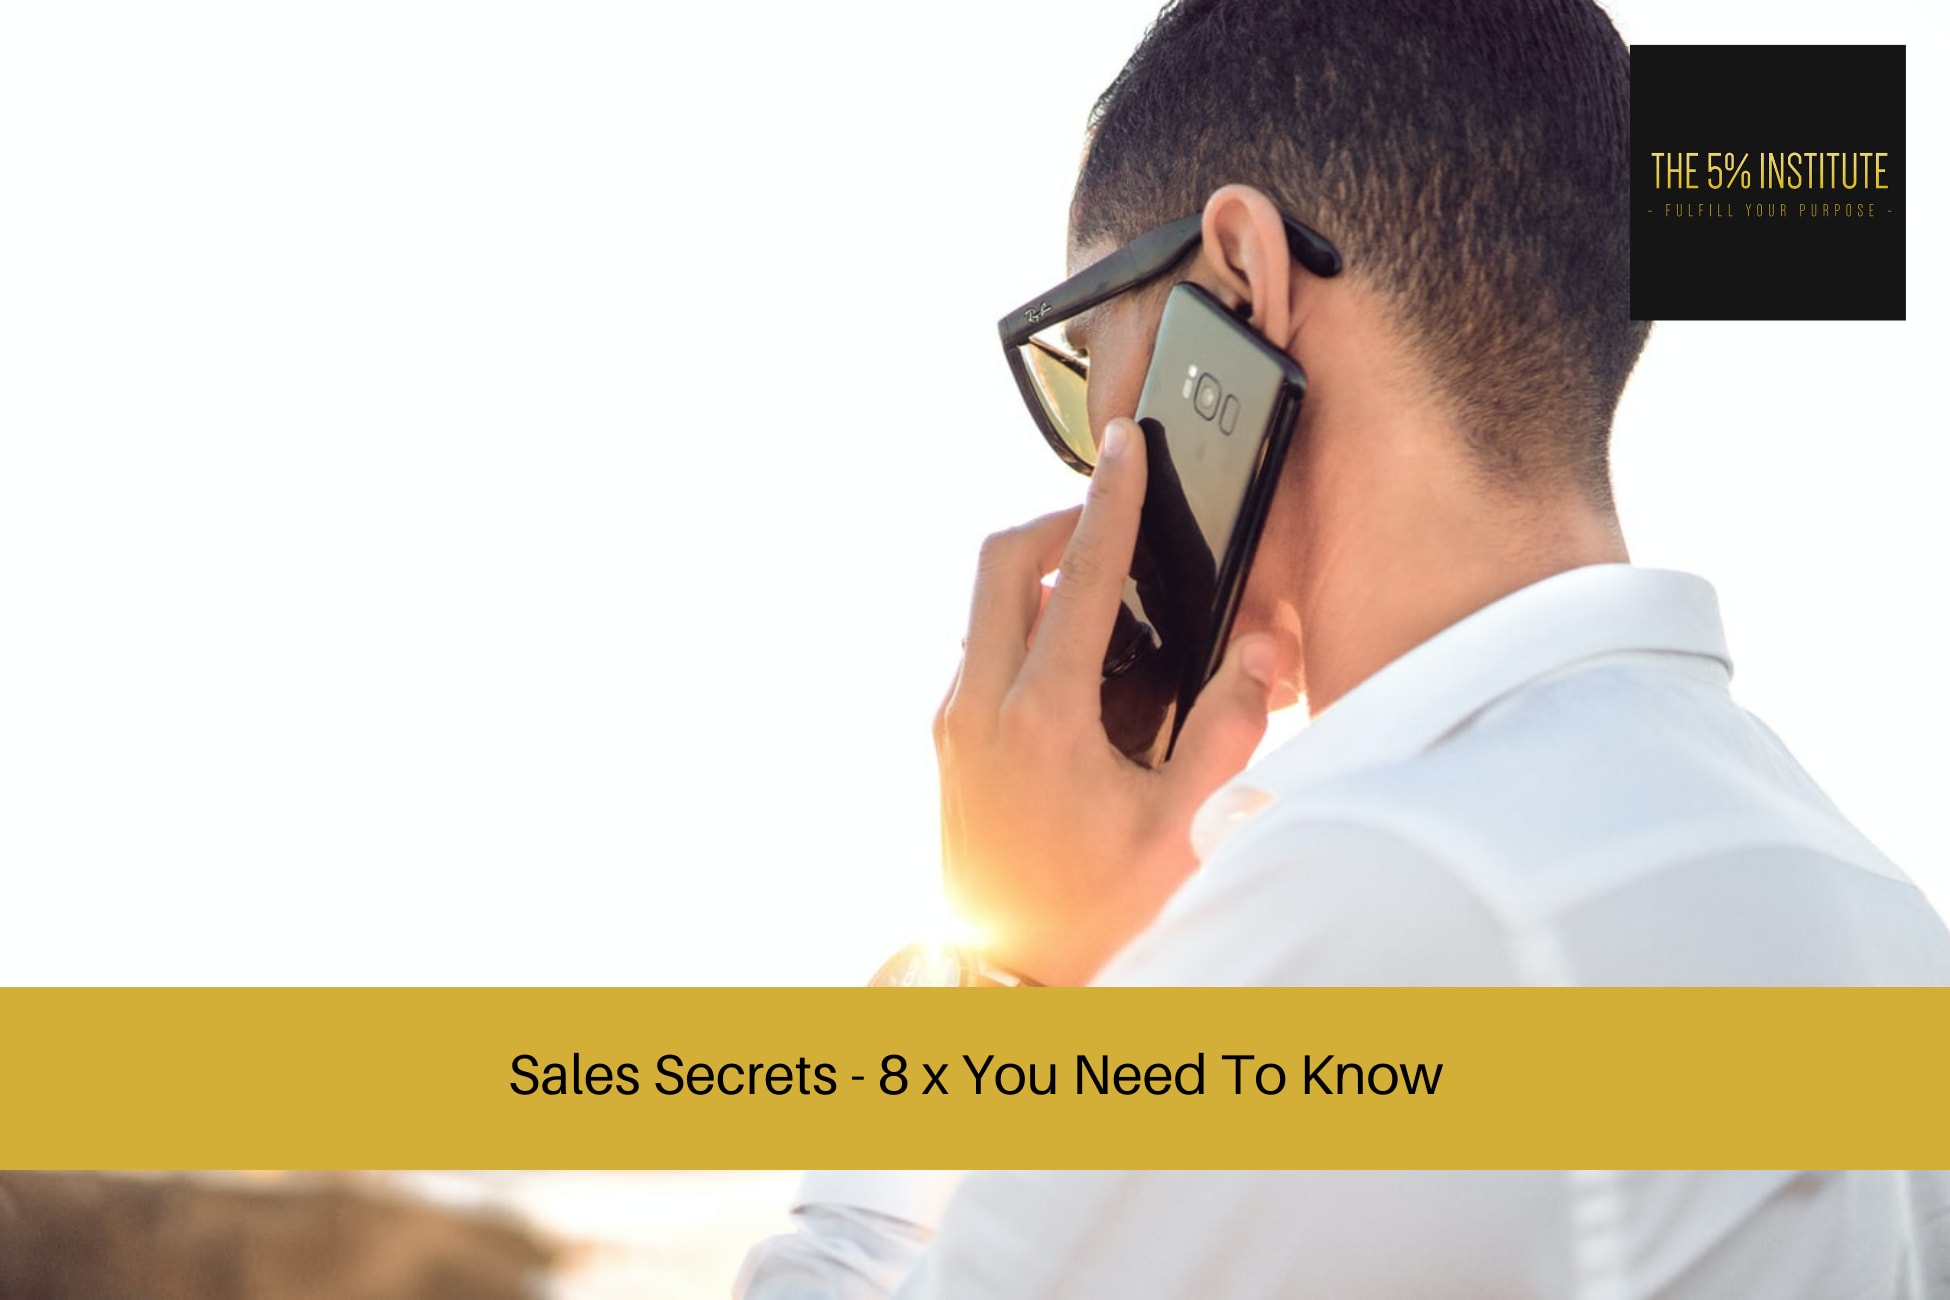 Sales Secrets - 8 x You Need To Know